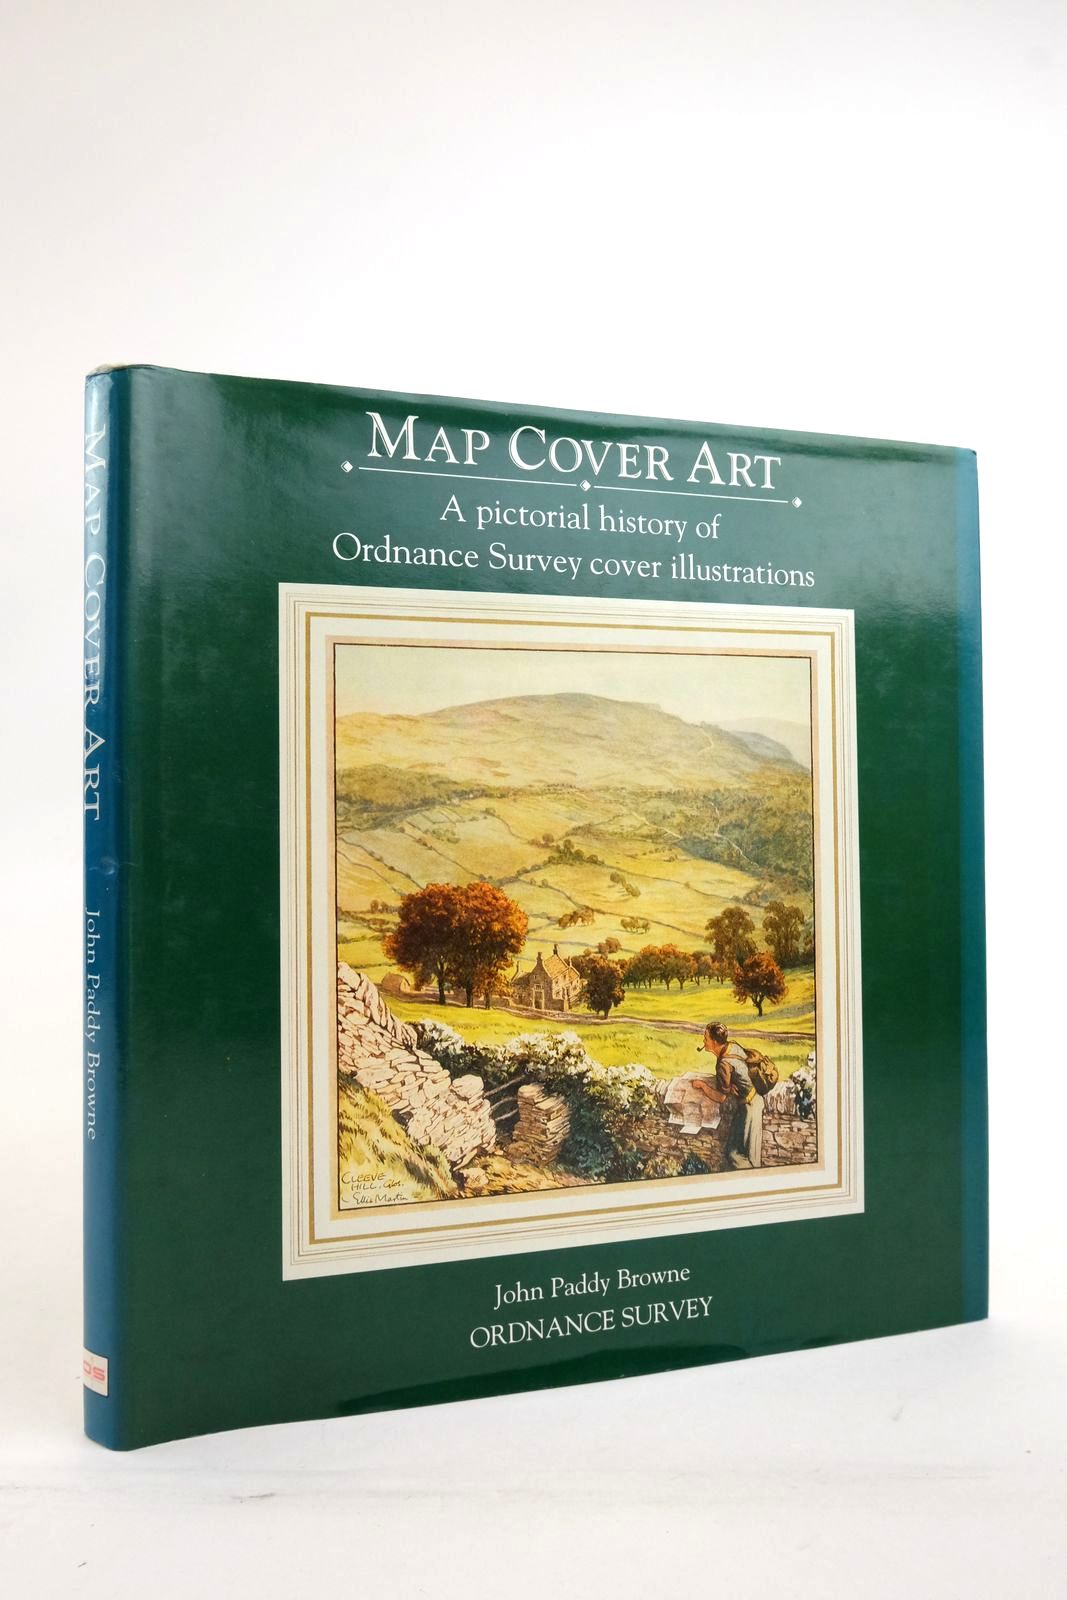 Photo of MAP COVER ART written by Browne, John Paddy published by Ordnance Survey (STOCK CODE: 2136331)  for sale by Stella & Rose's Books